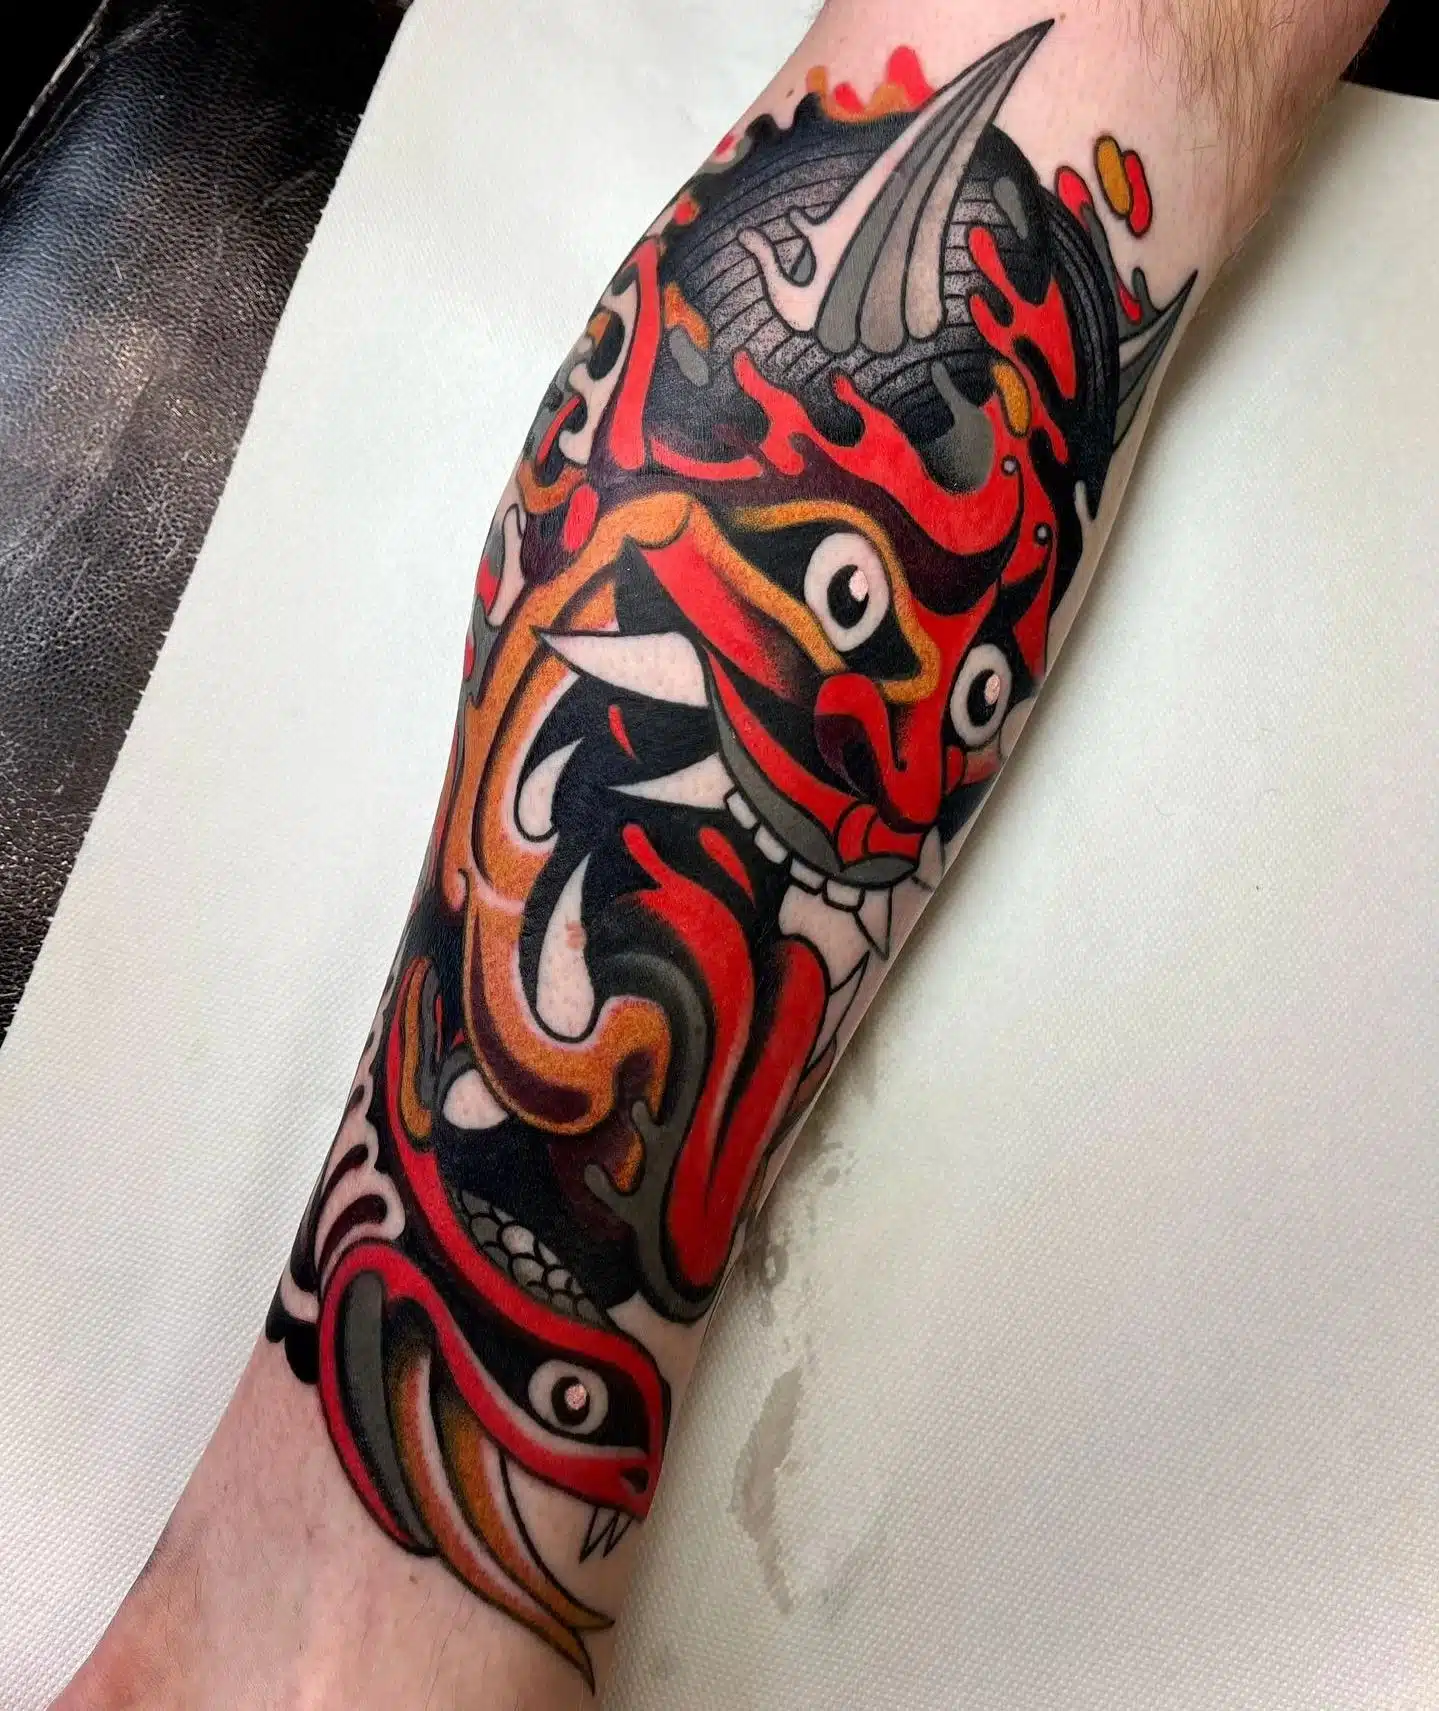 Enriquefied Oni Mask. Marvelous work by the magnificent bastard. 
👹enriquevemu 👺

Created using Supplies from our sponsors:
magnumtattoosupplies.uk
yayofamilia

                